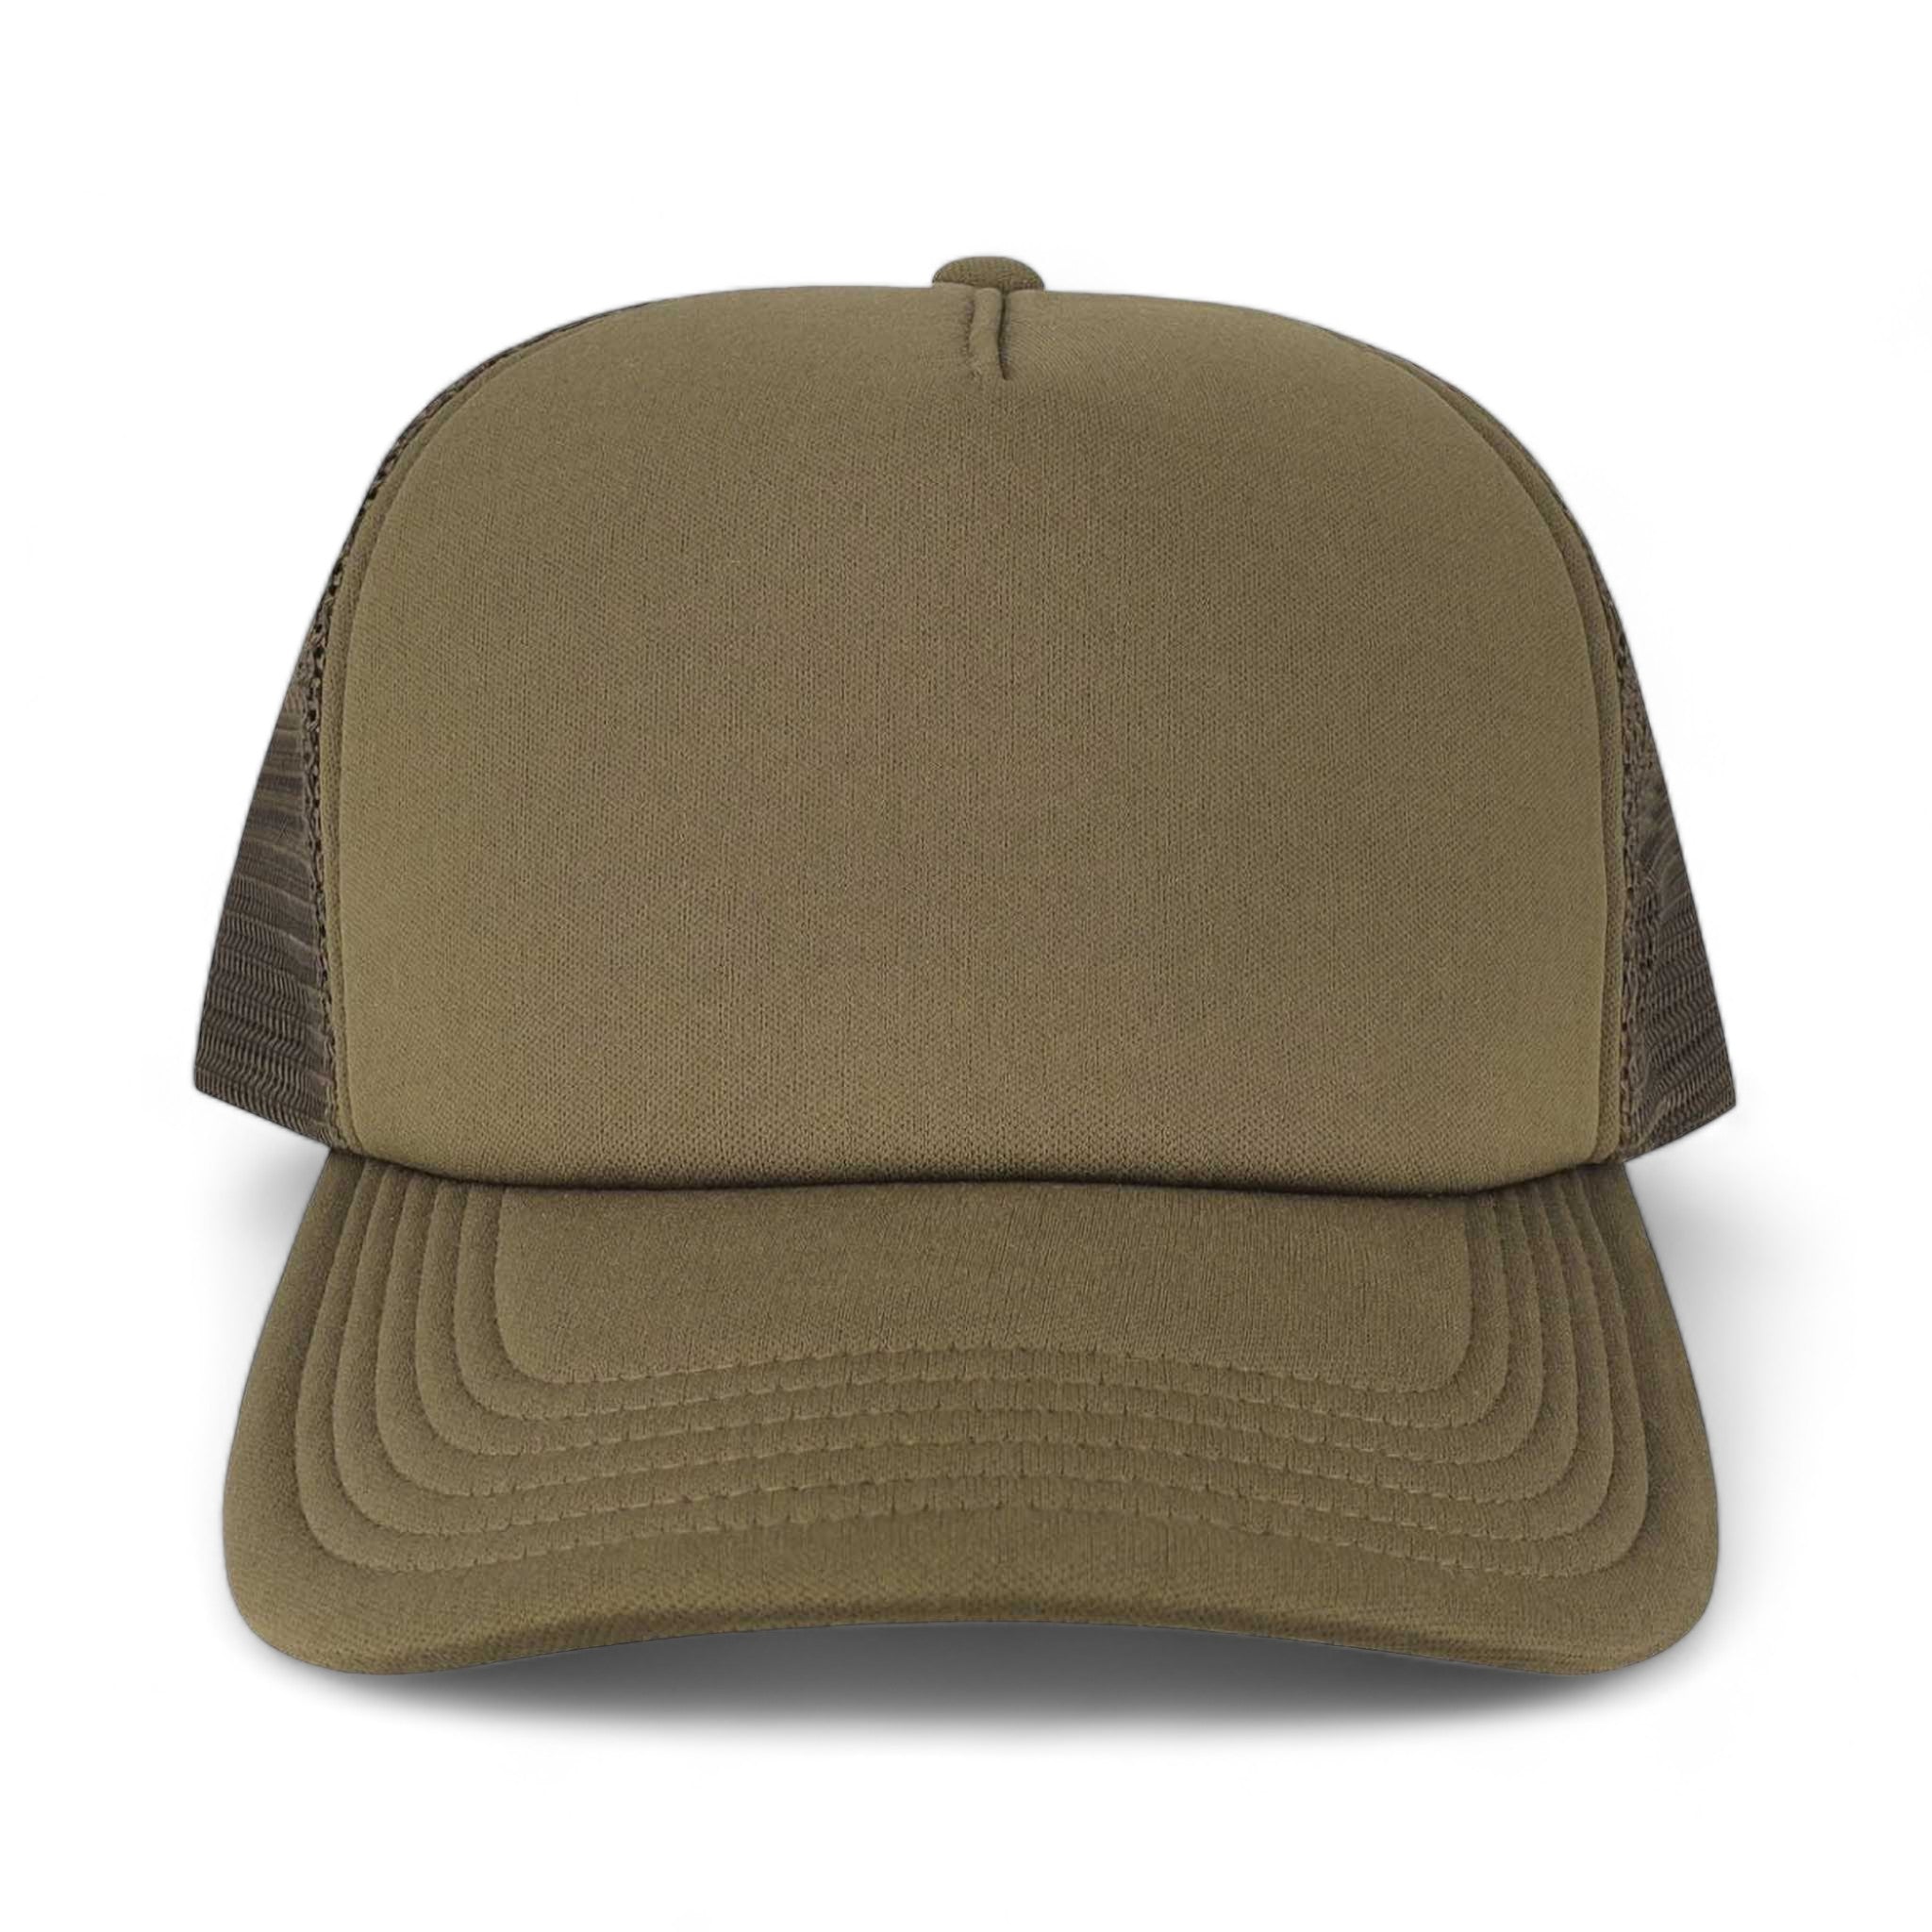 Front view of LEGACY LTA custom hat in brown